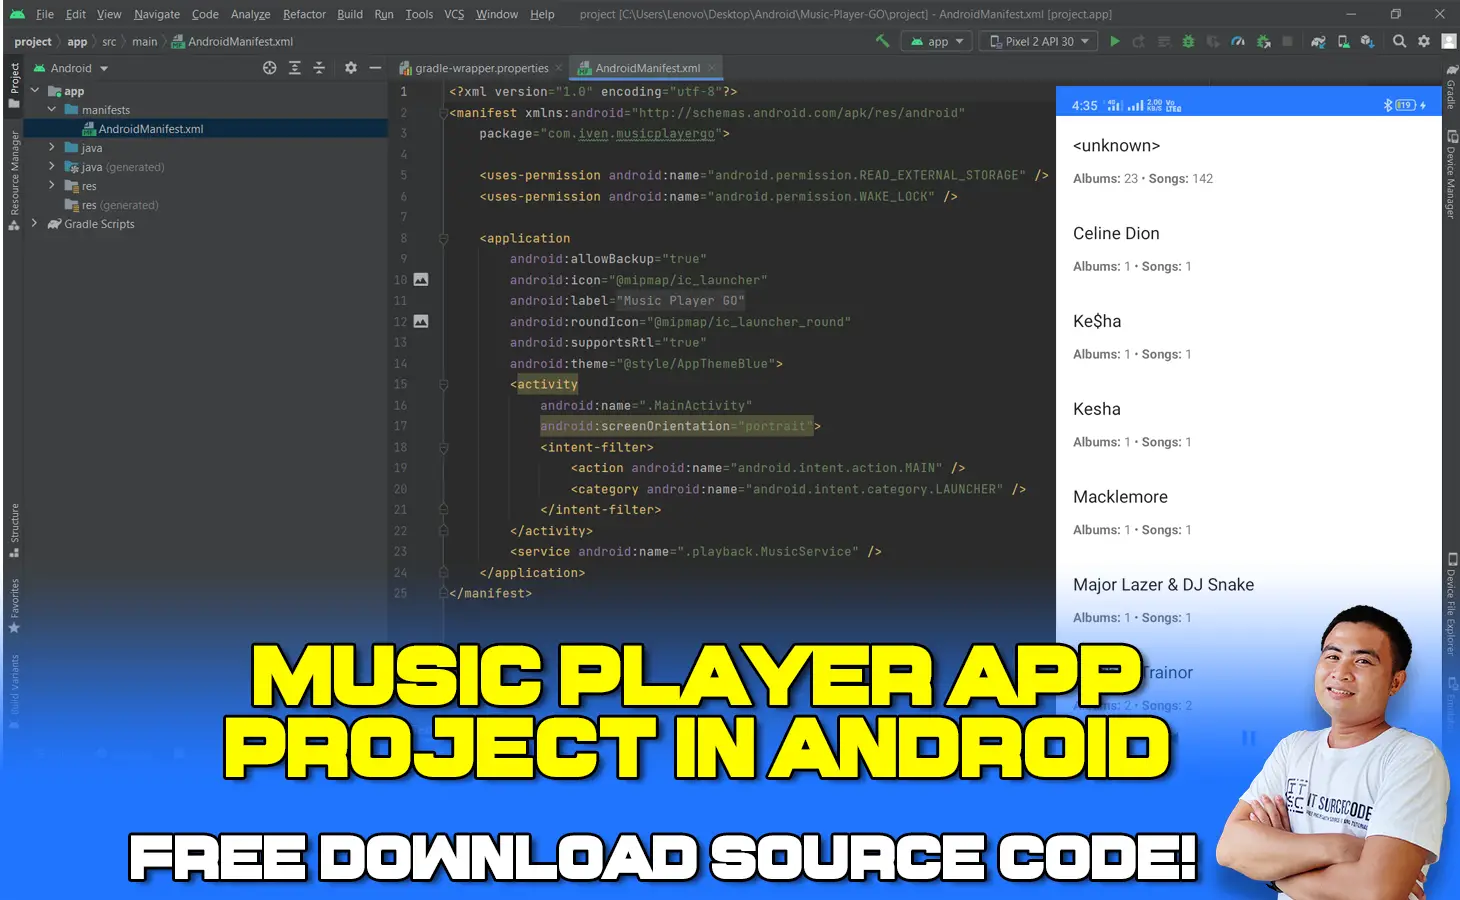 Music Player App in Android Studio with Source Code